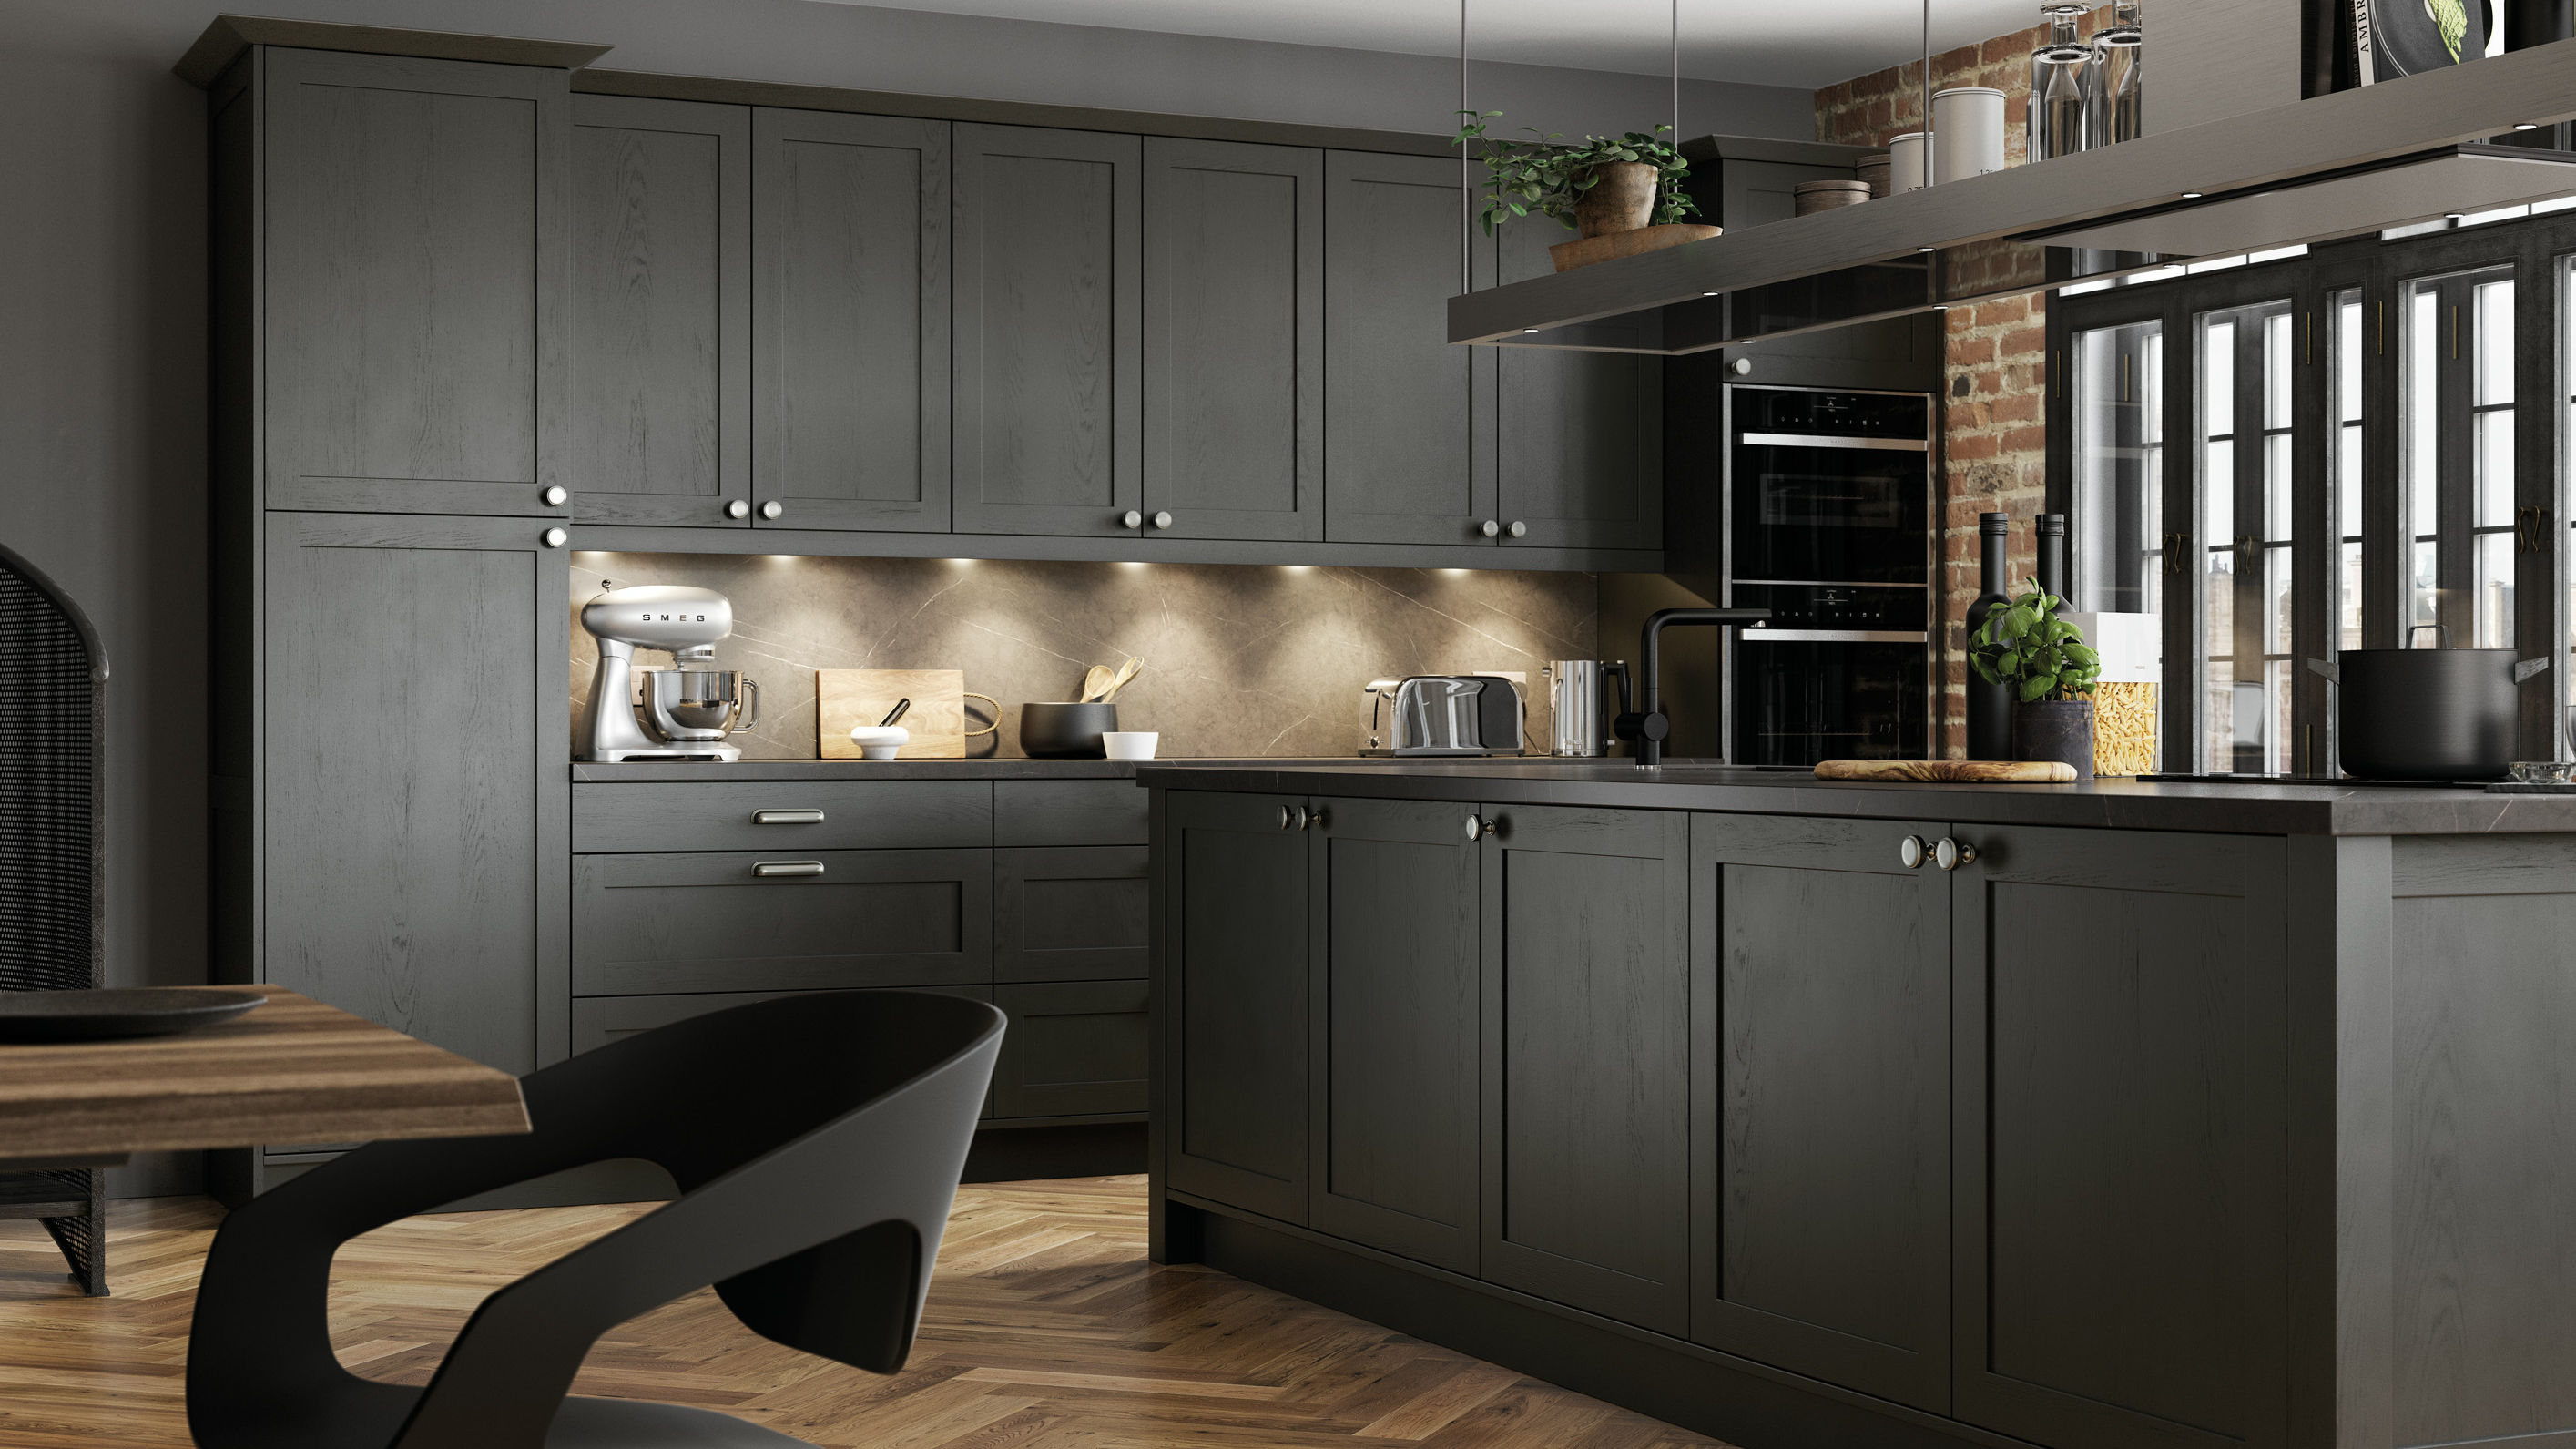 Aldana solid wood graphite kitchens with detailed craftsmanship and an elegant, moody grey aesthetic